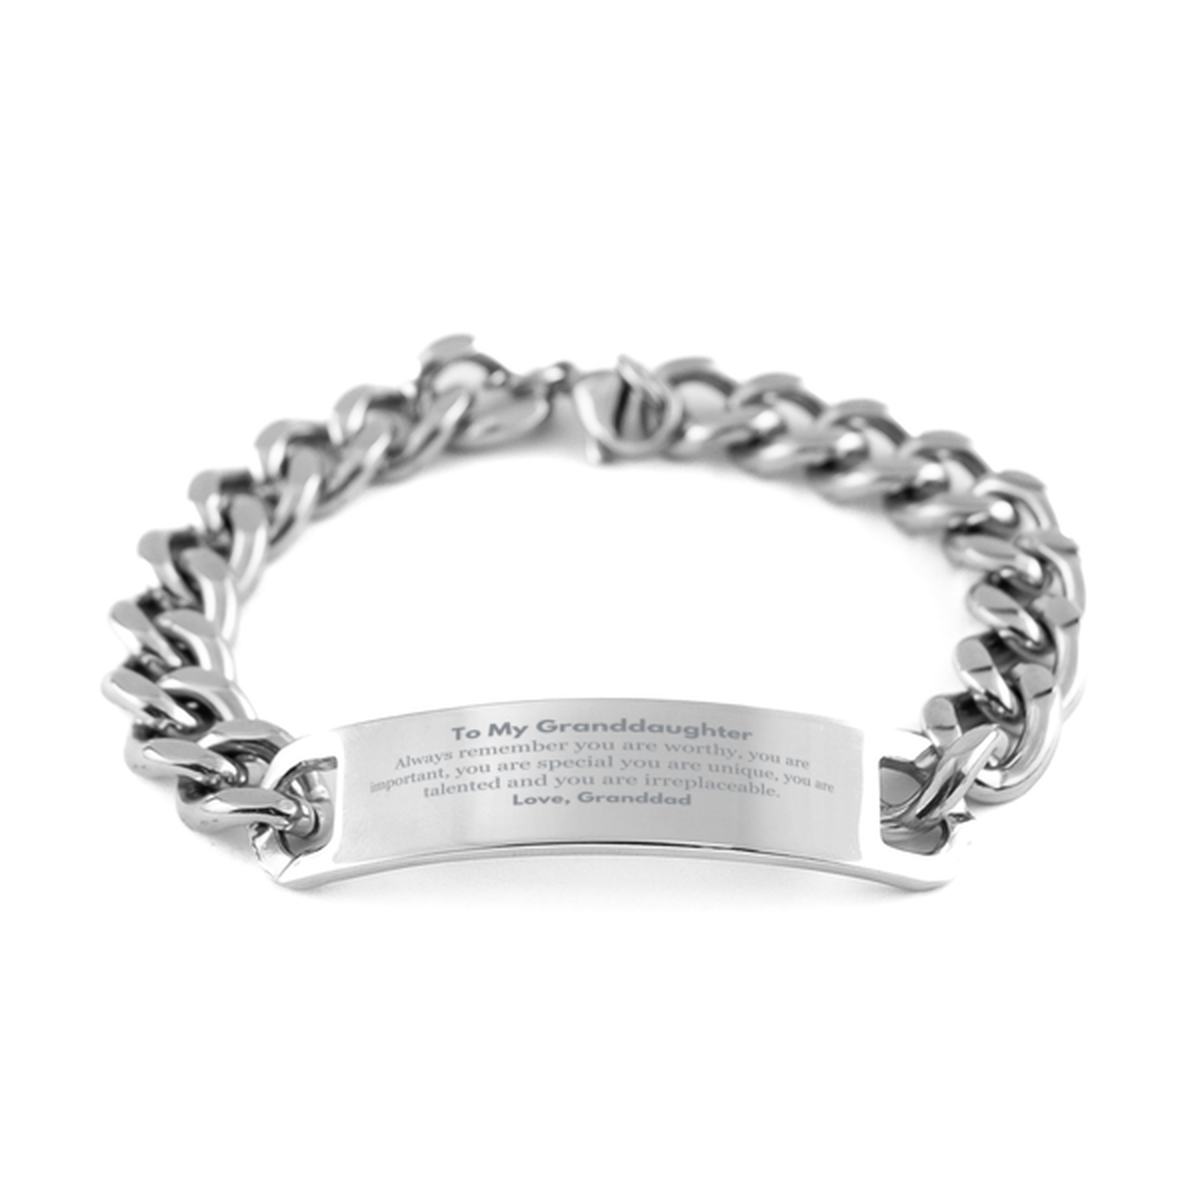 Granddaughter Birthday Gifts from Granddad, Inspirational Cuban Chain Stainless Steel Bracelet for Granddaughter Christmas Graduation Gifts for Granddaughter Always remember you are worthy, you are important. Love, Granddad